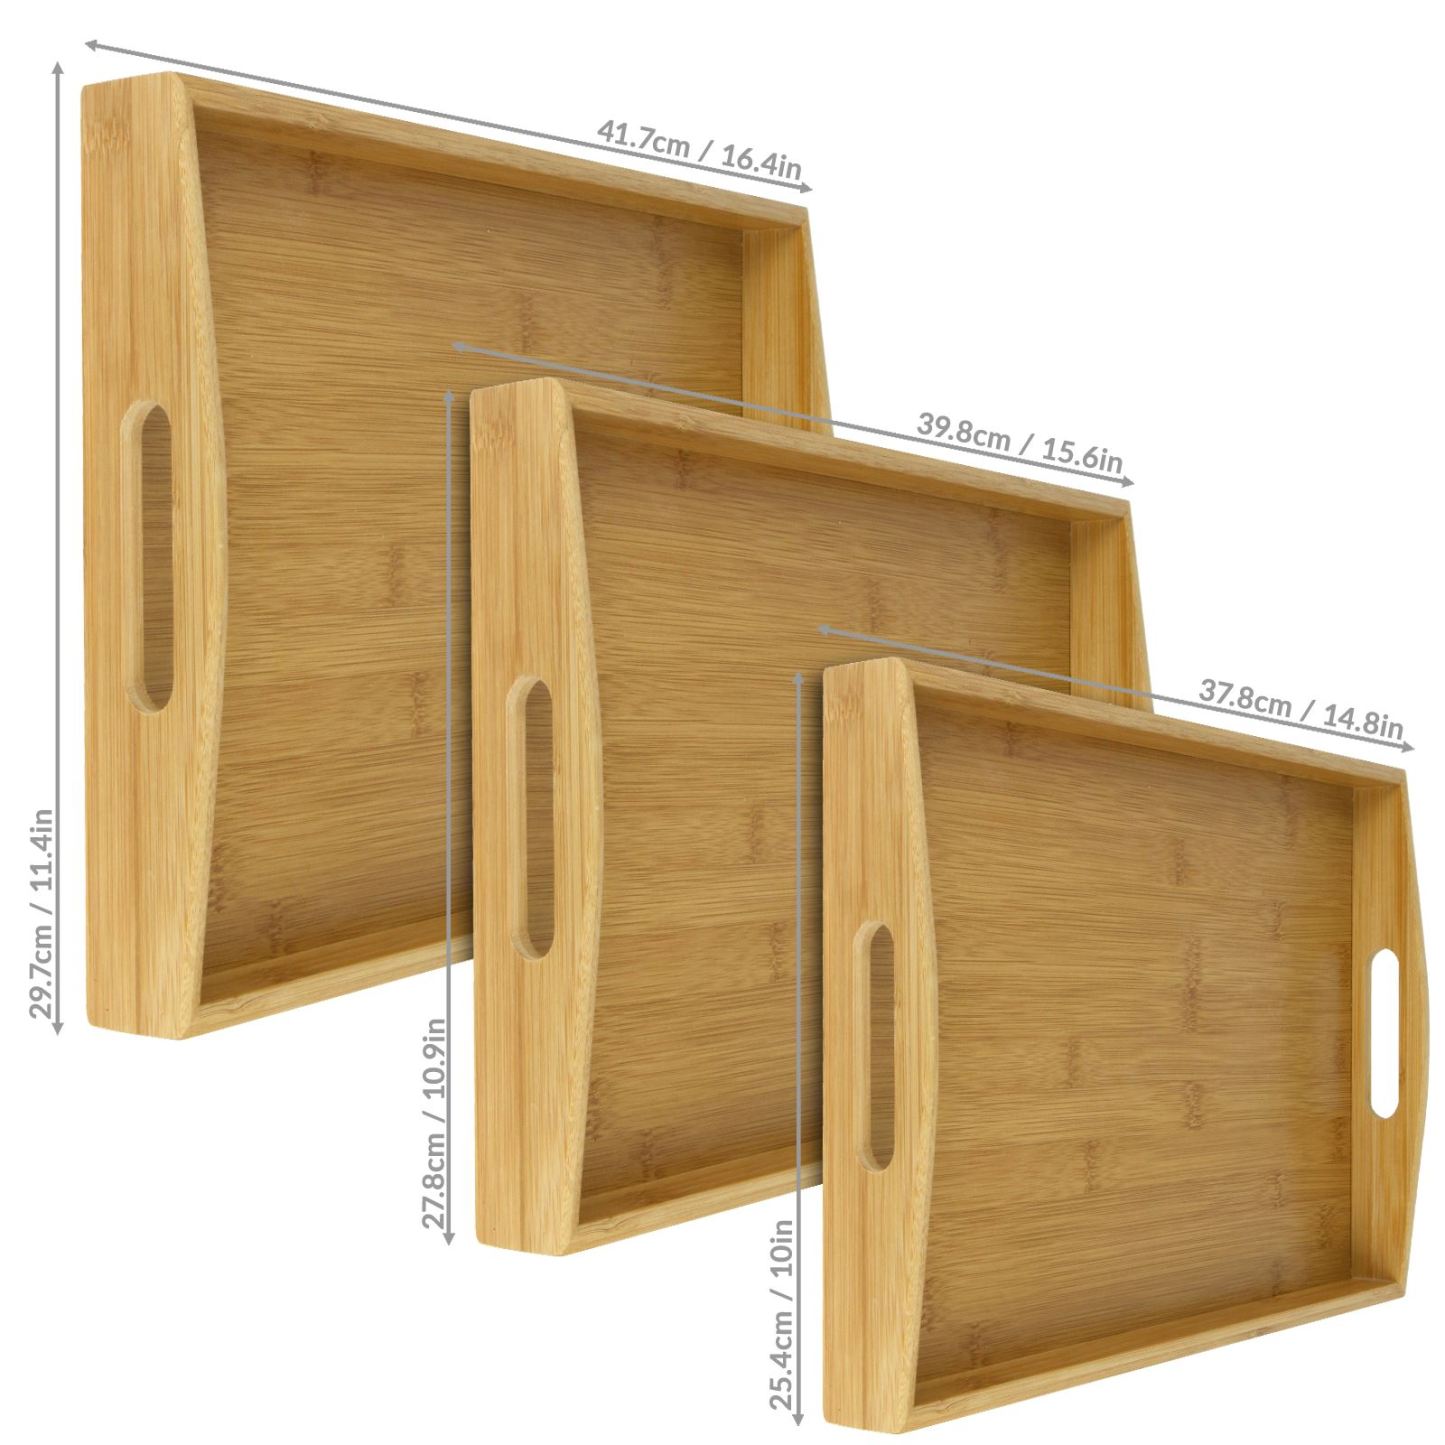 Bamboo Serving Trays - Set of 3 | M&W